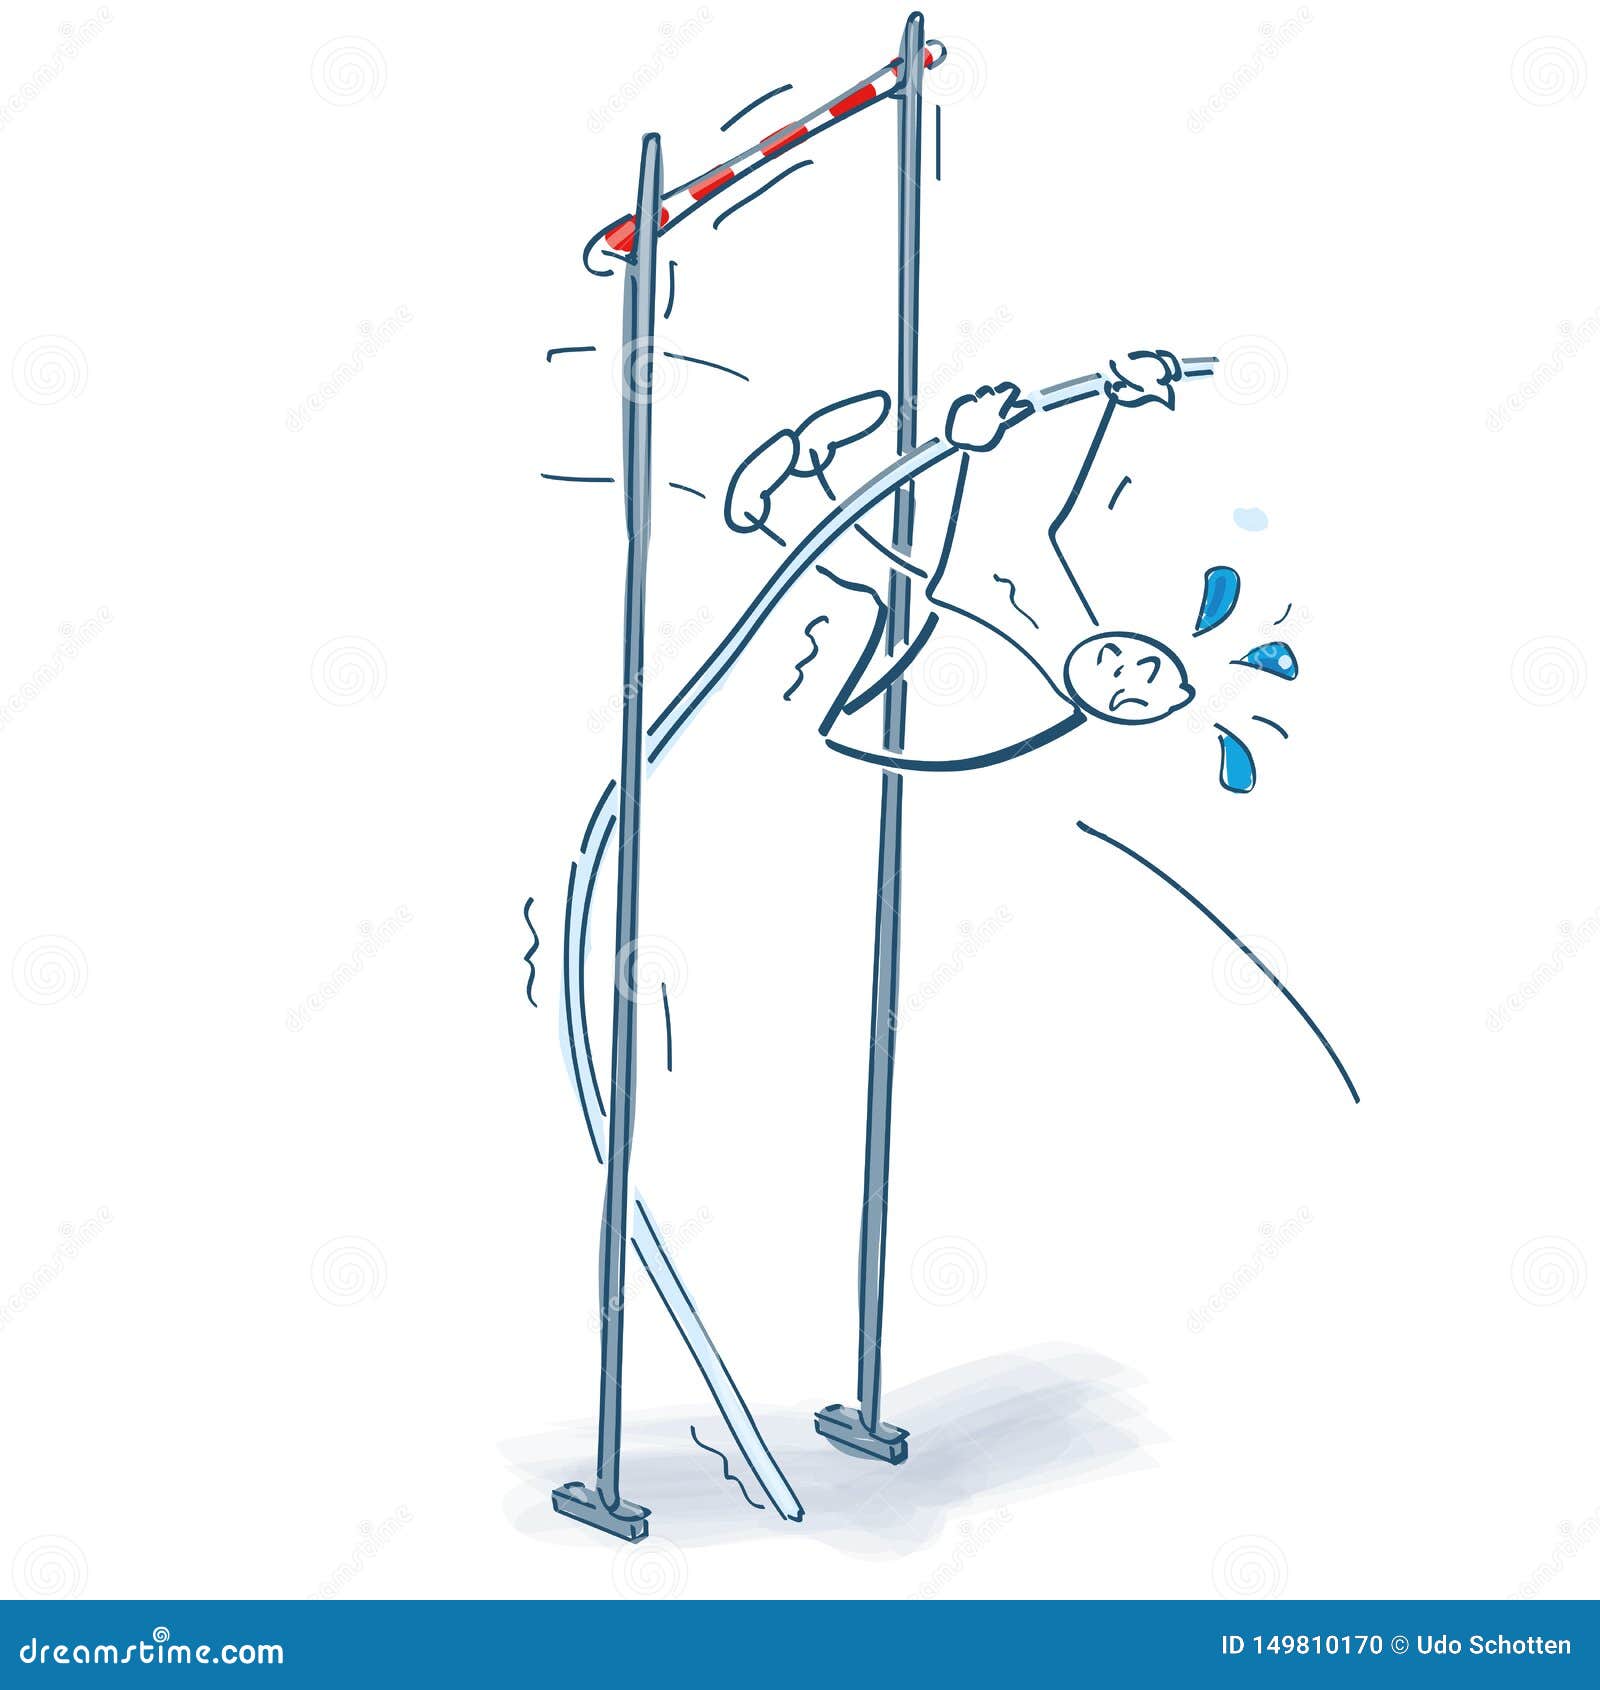 Stick Figure Jumps Too Low During High Jump Stock Vector Illustration Of Jump Aims